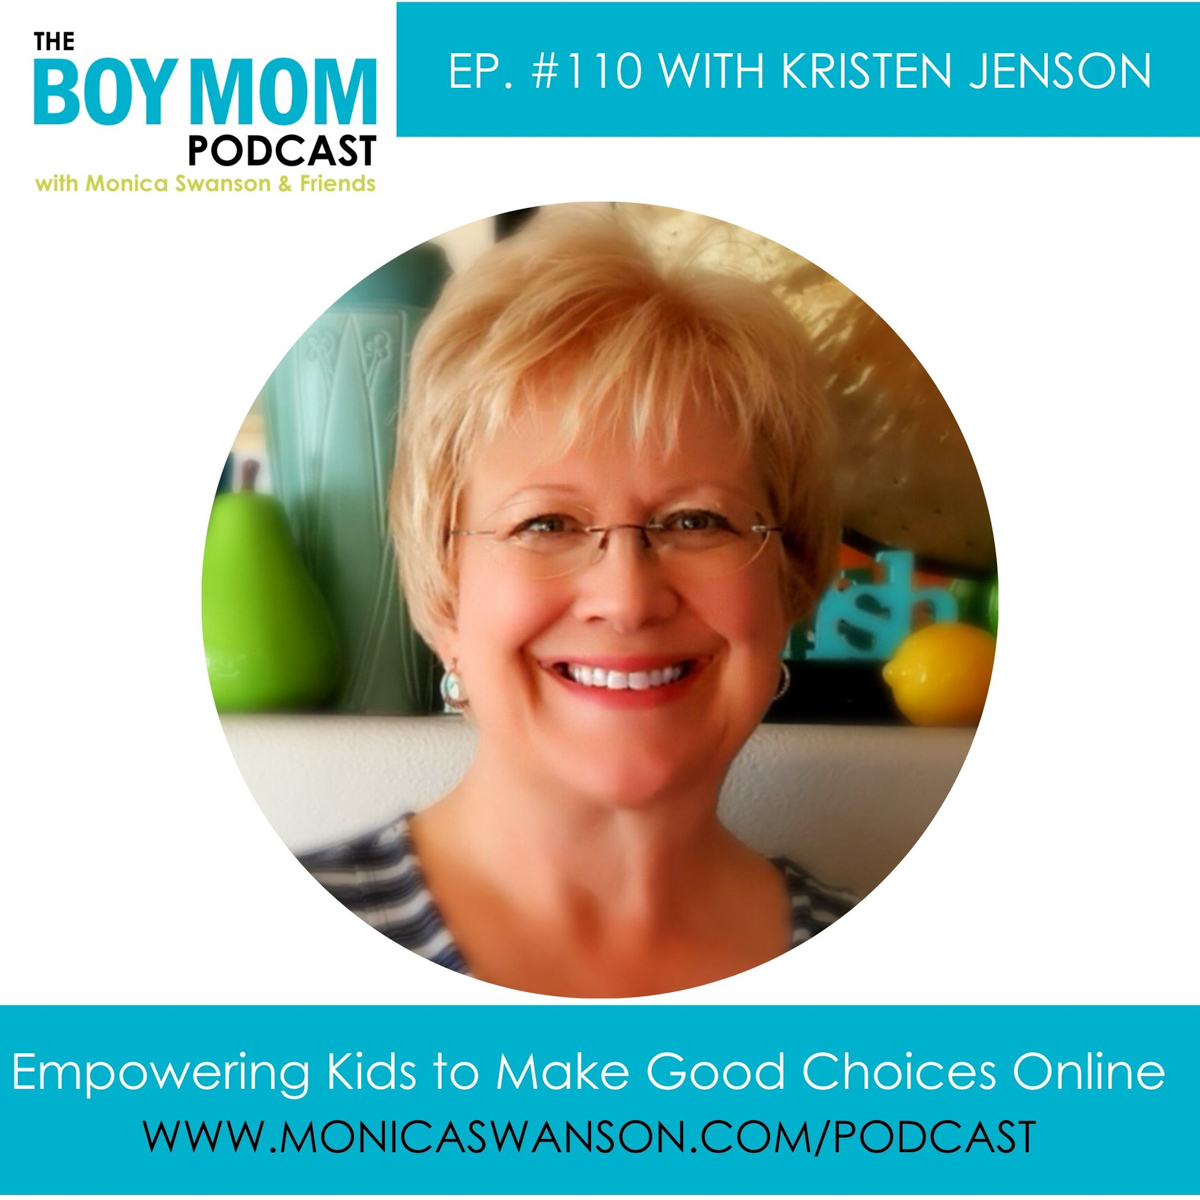 Empowering Kids to Make Good Choices Online {Episode 110 with Kristen Jenson}